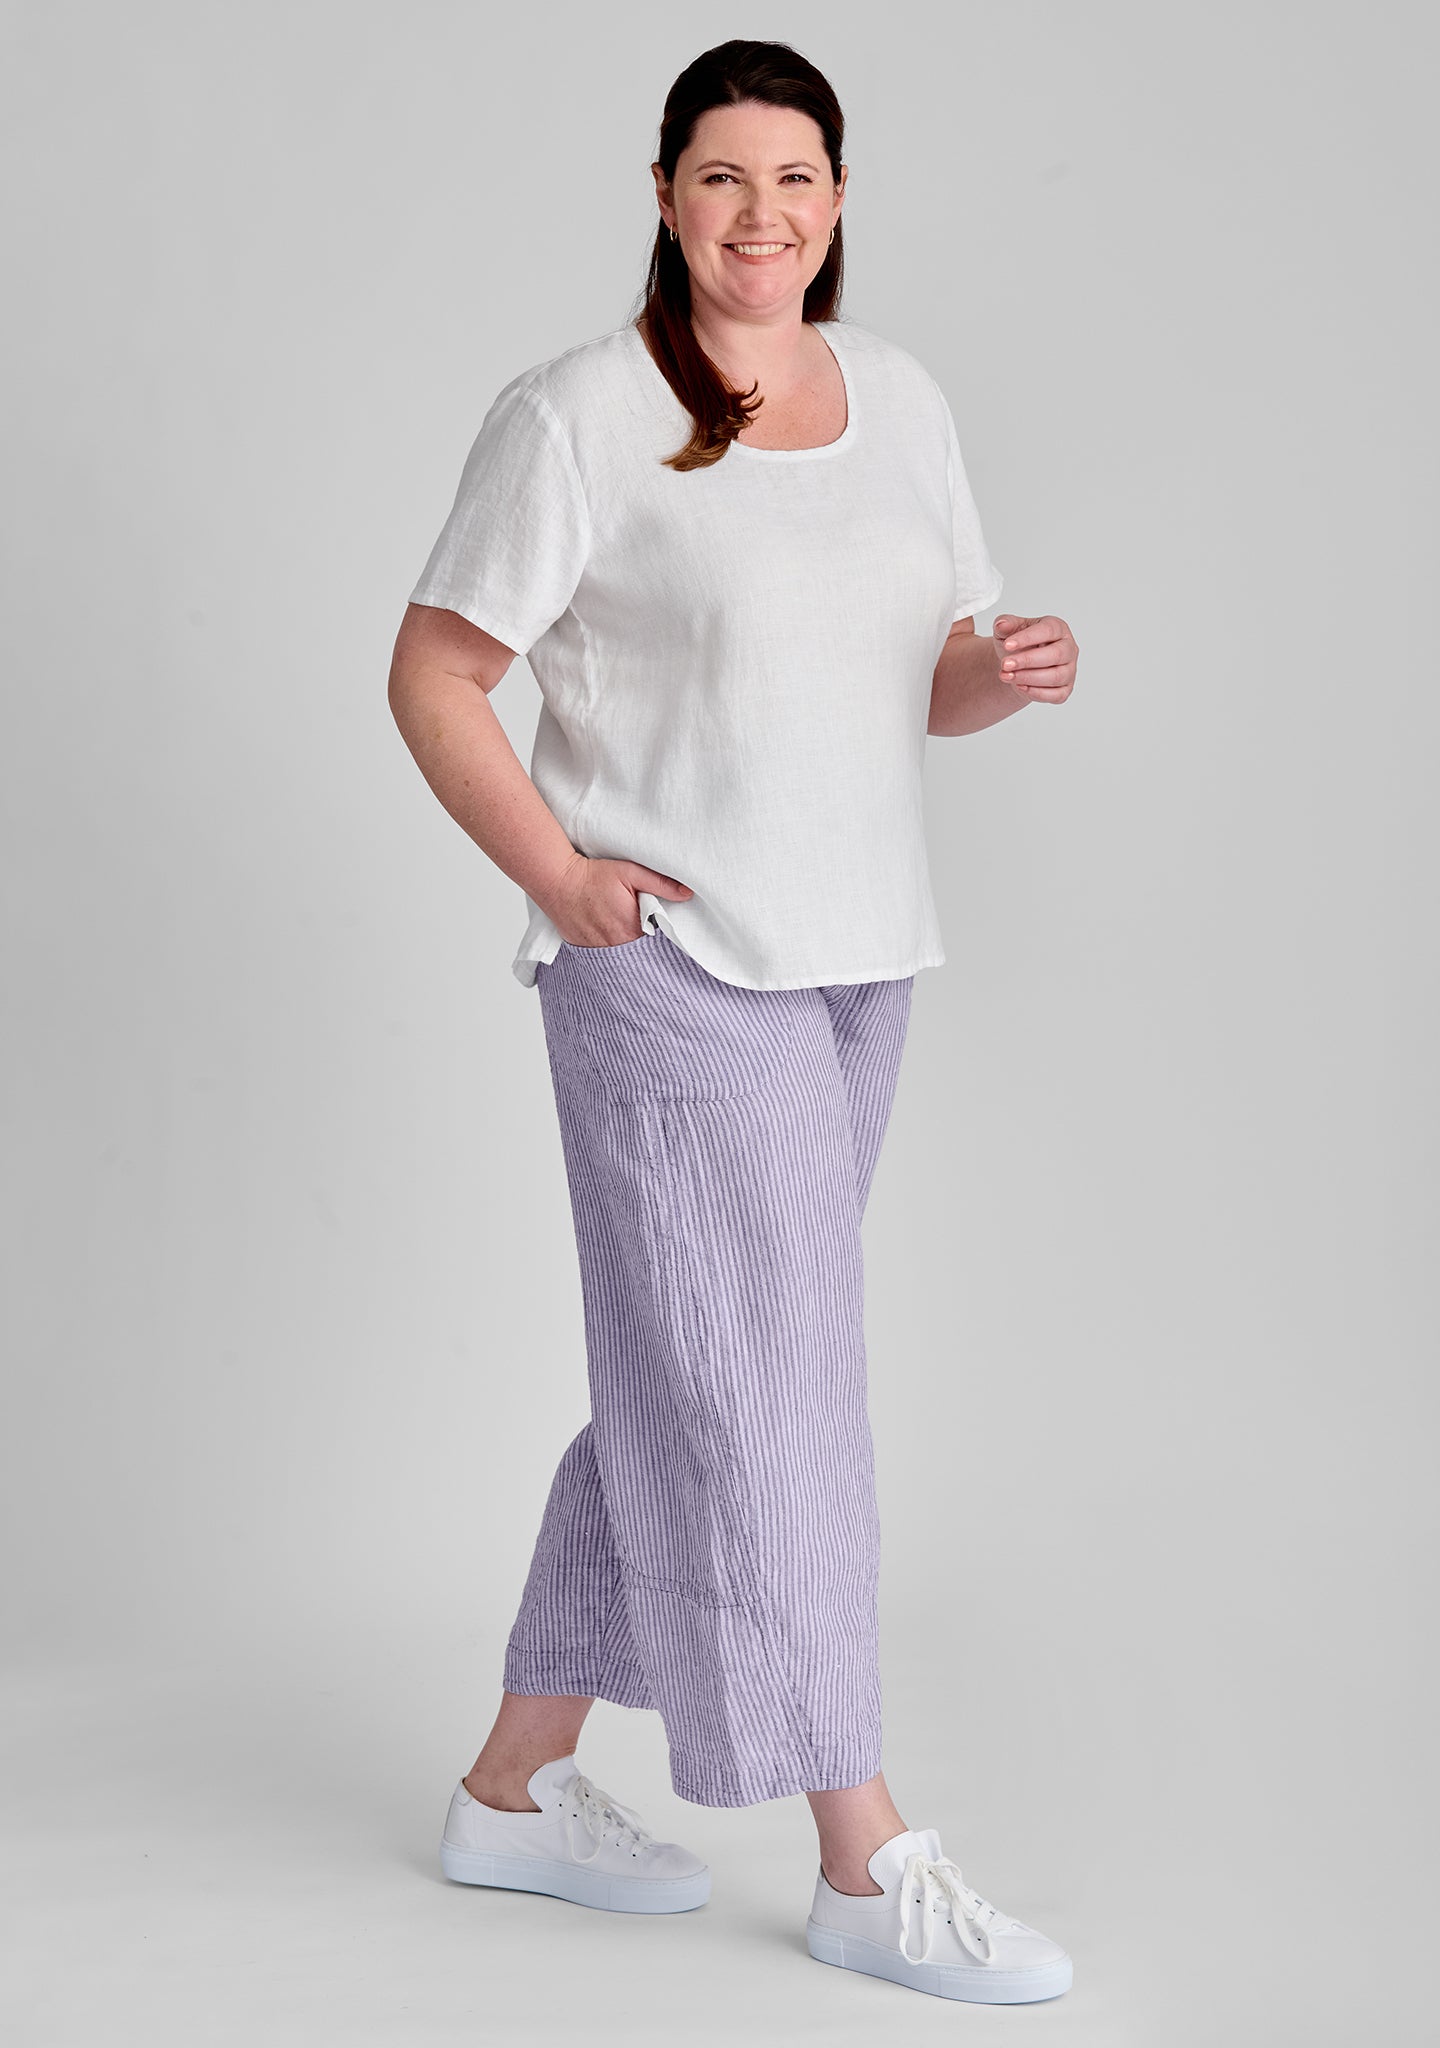 FLAX linen tee shirt in white with linen pants in purple